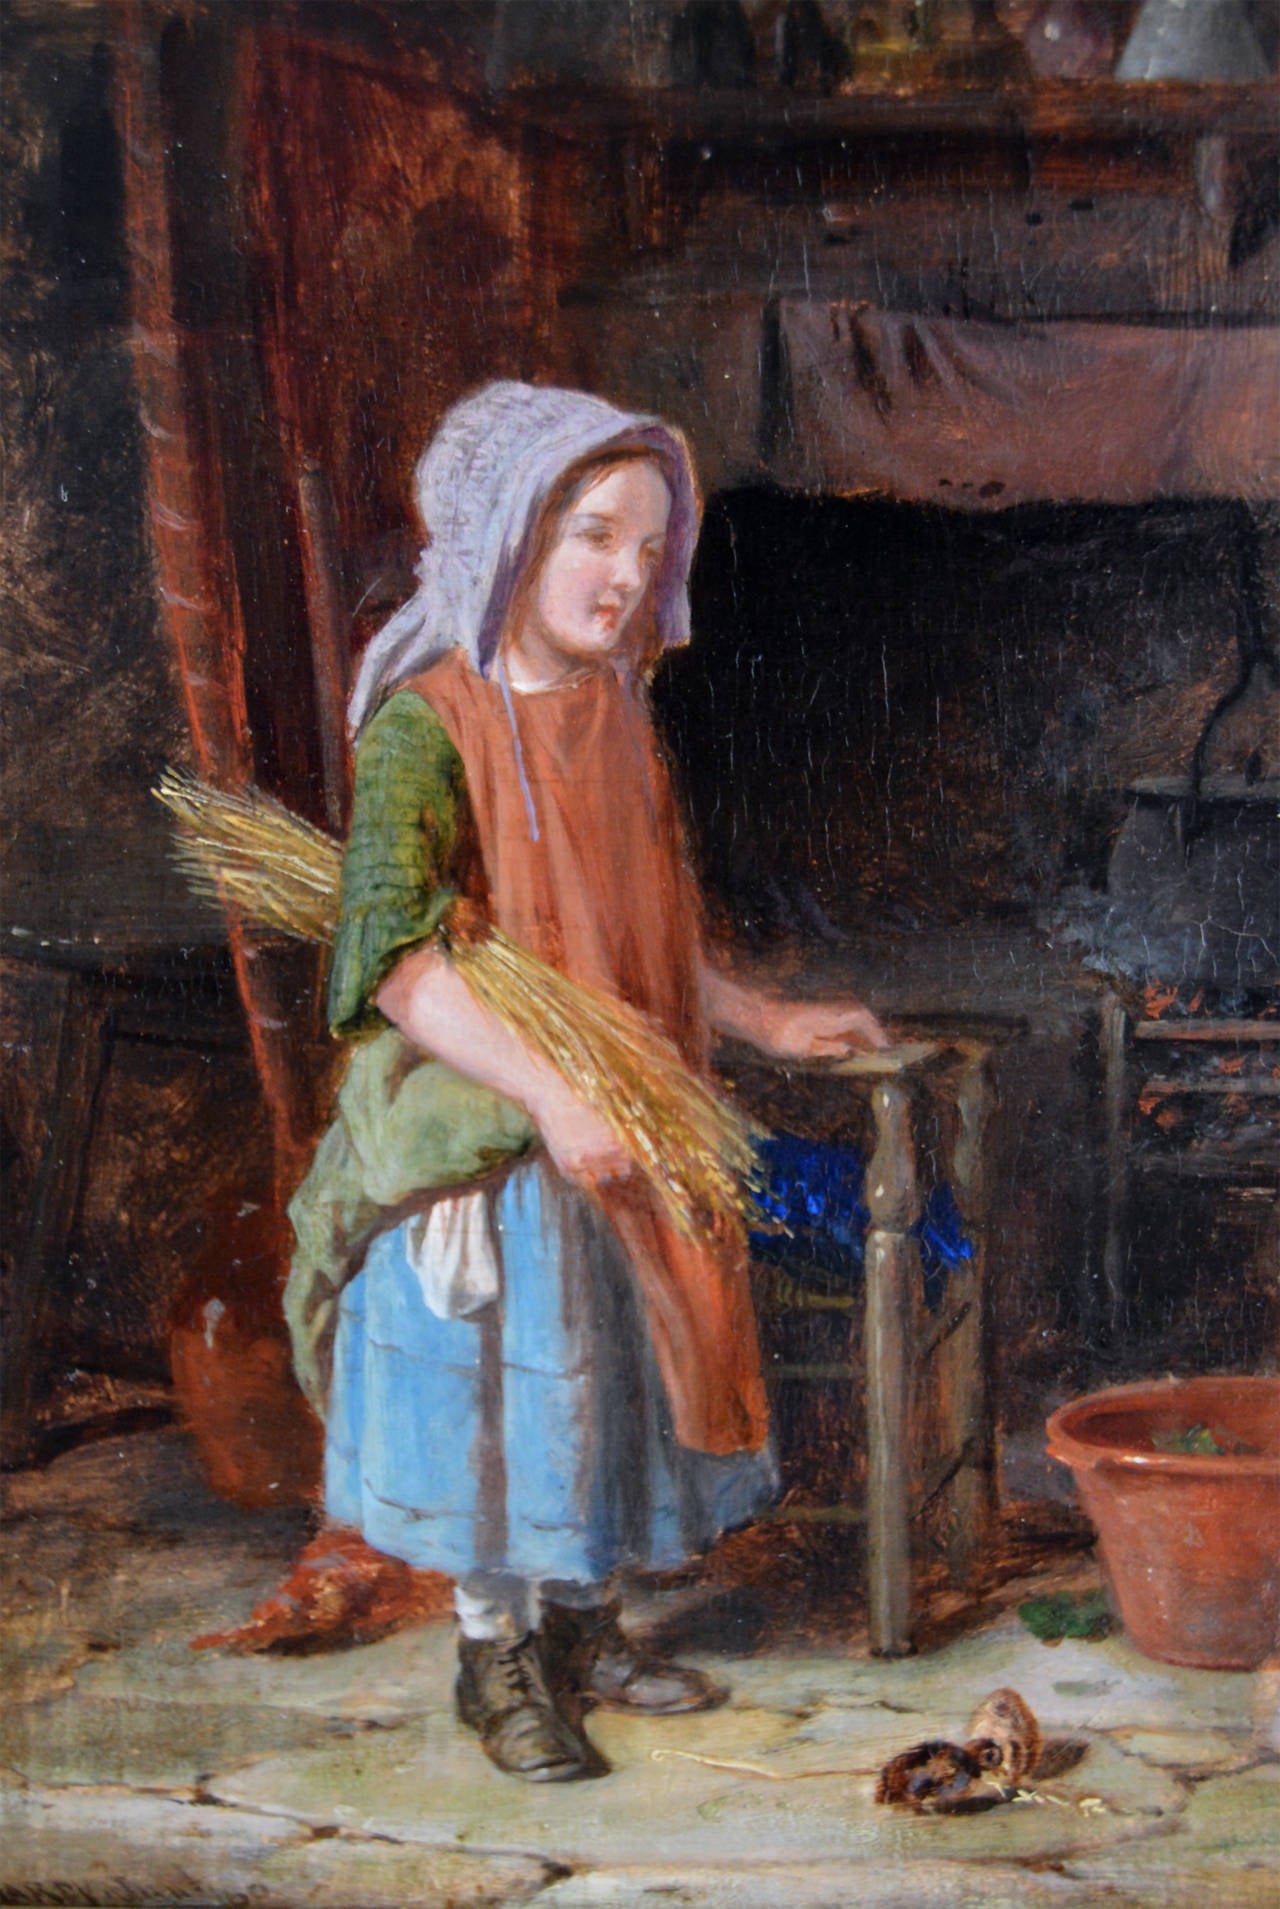 James Hardy Junior 
British, (1832-1889)
Preparing Supper 
Oil on panel, signed & dated ‘60
Image size: 5½ inches x 7½ inches 
Size including frame: 9½ x 11½ inches
Provenance: Frost & Reed

James Hardy Junior was born in 1832, the son of